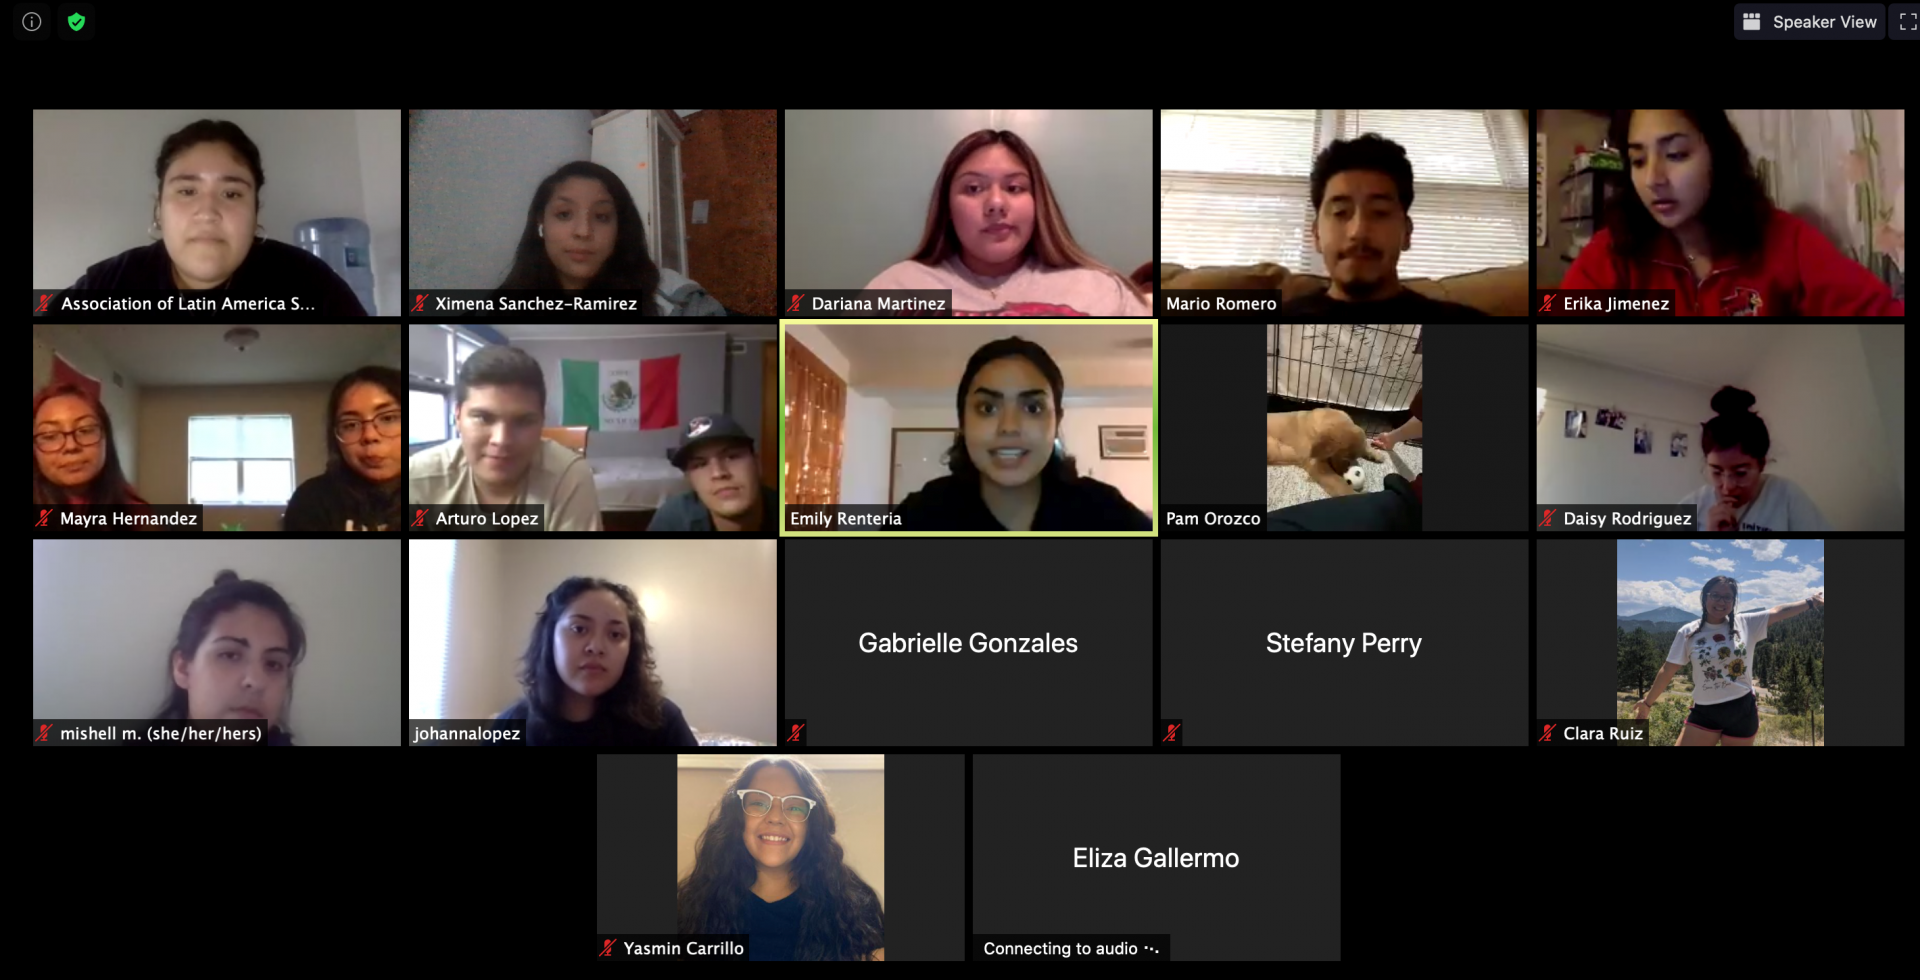 Association of Latinx American Students (ALAS) members during a Zoom event.